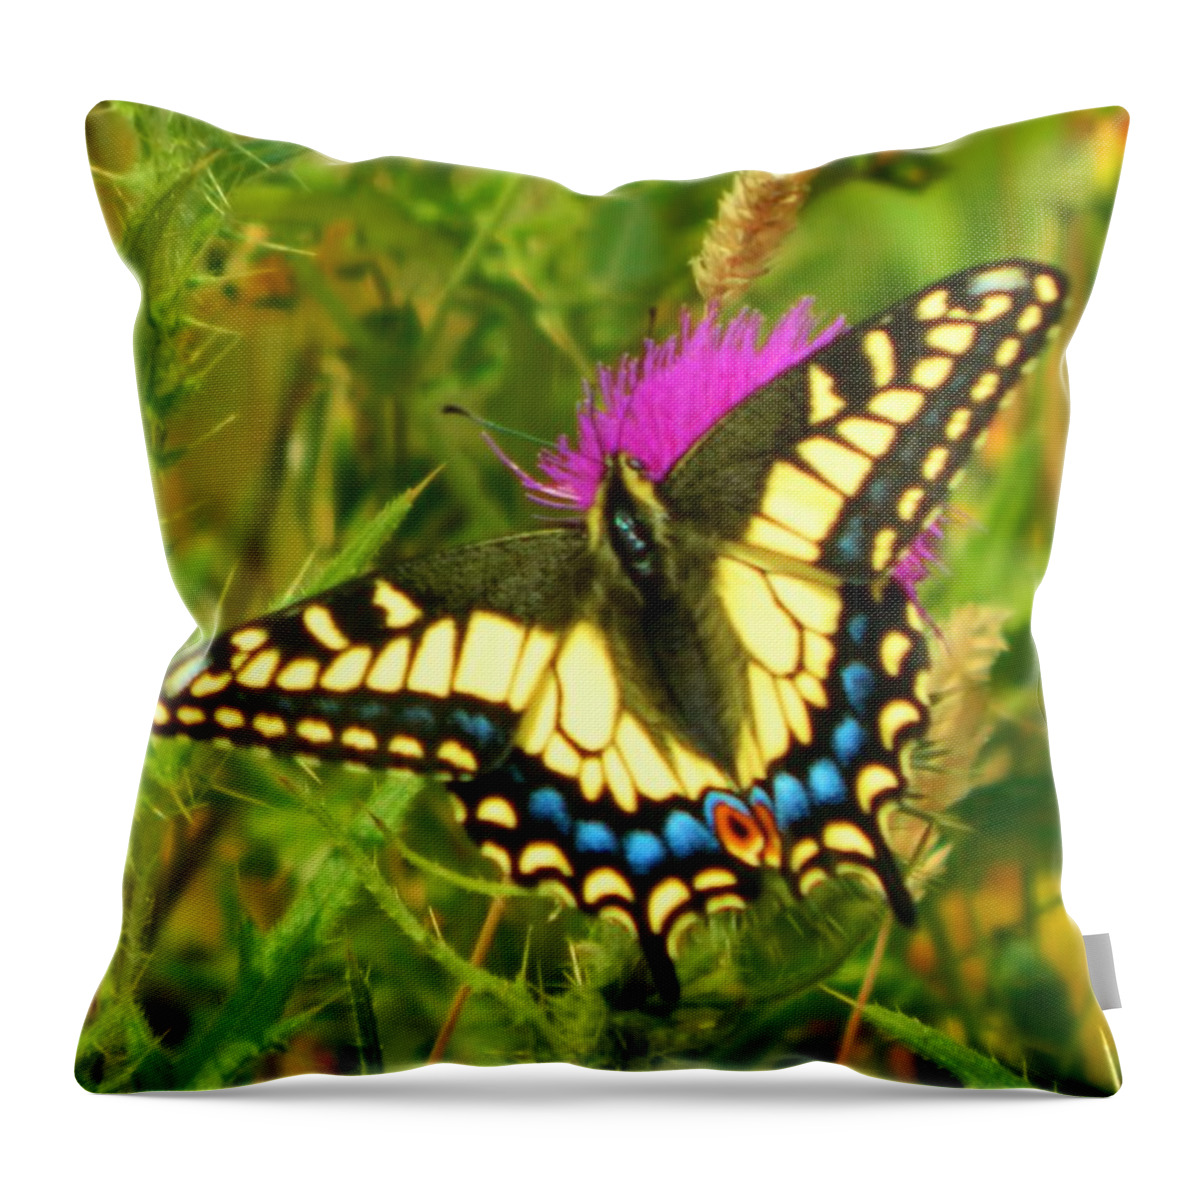 Landscape Throw Pillow featuring the photograph Big Beautiful Butterfly by Gallery Of Hope 